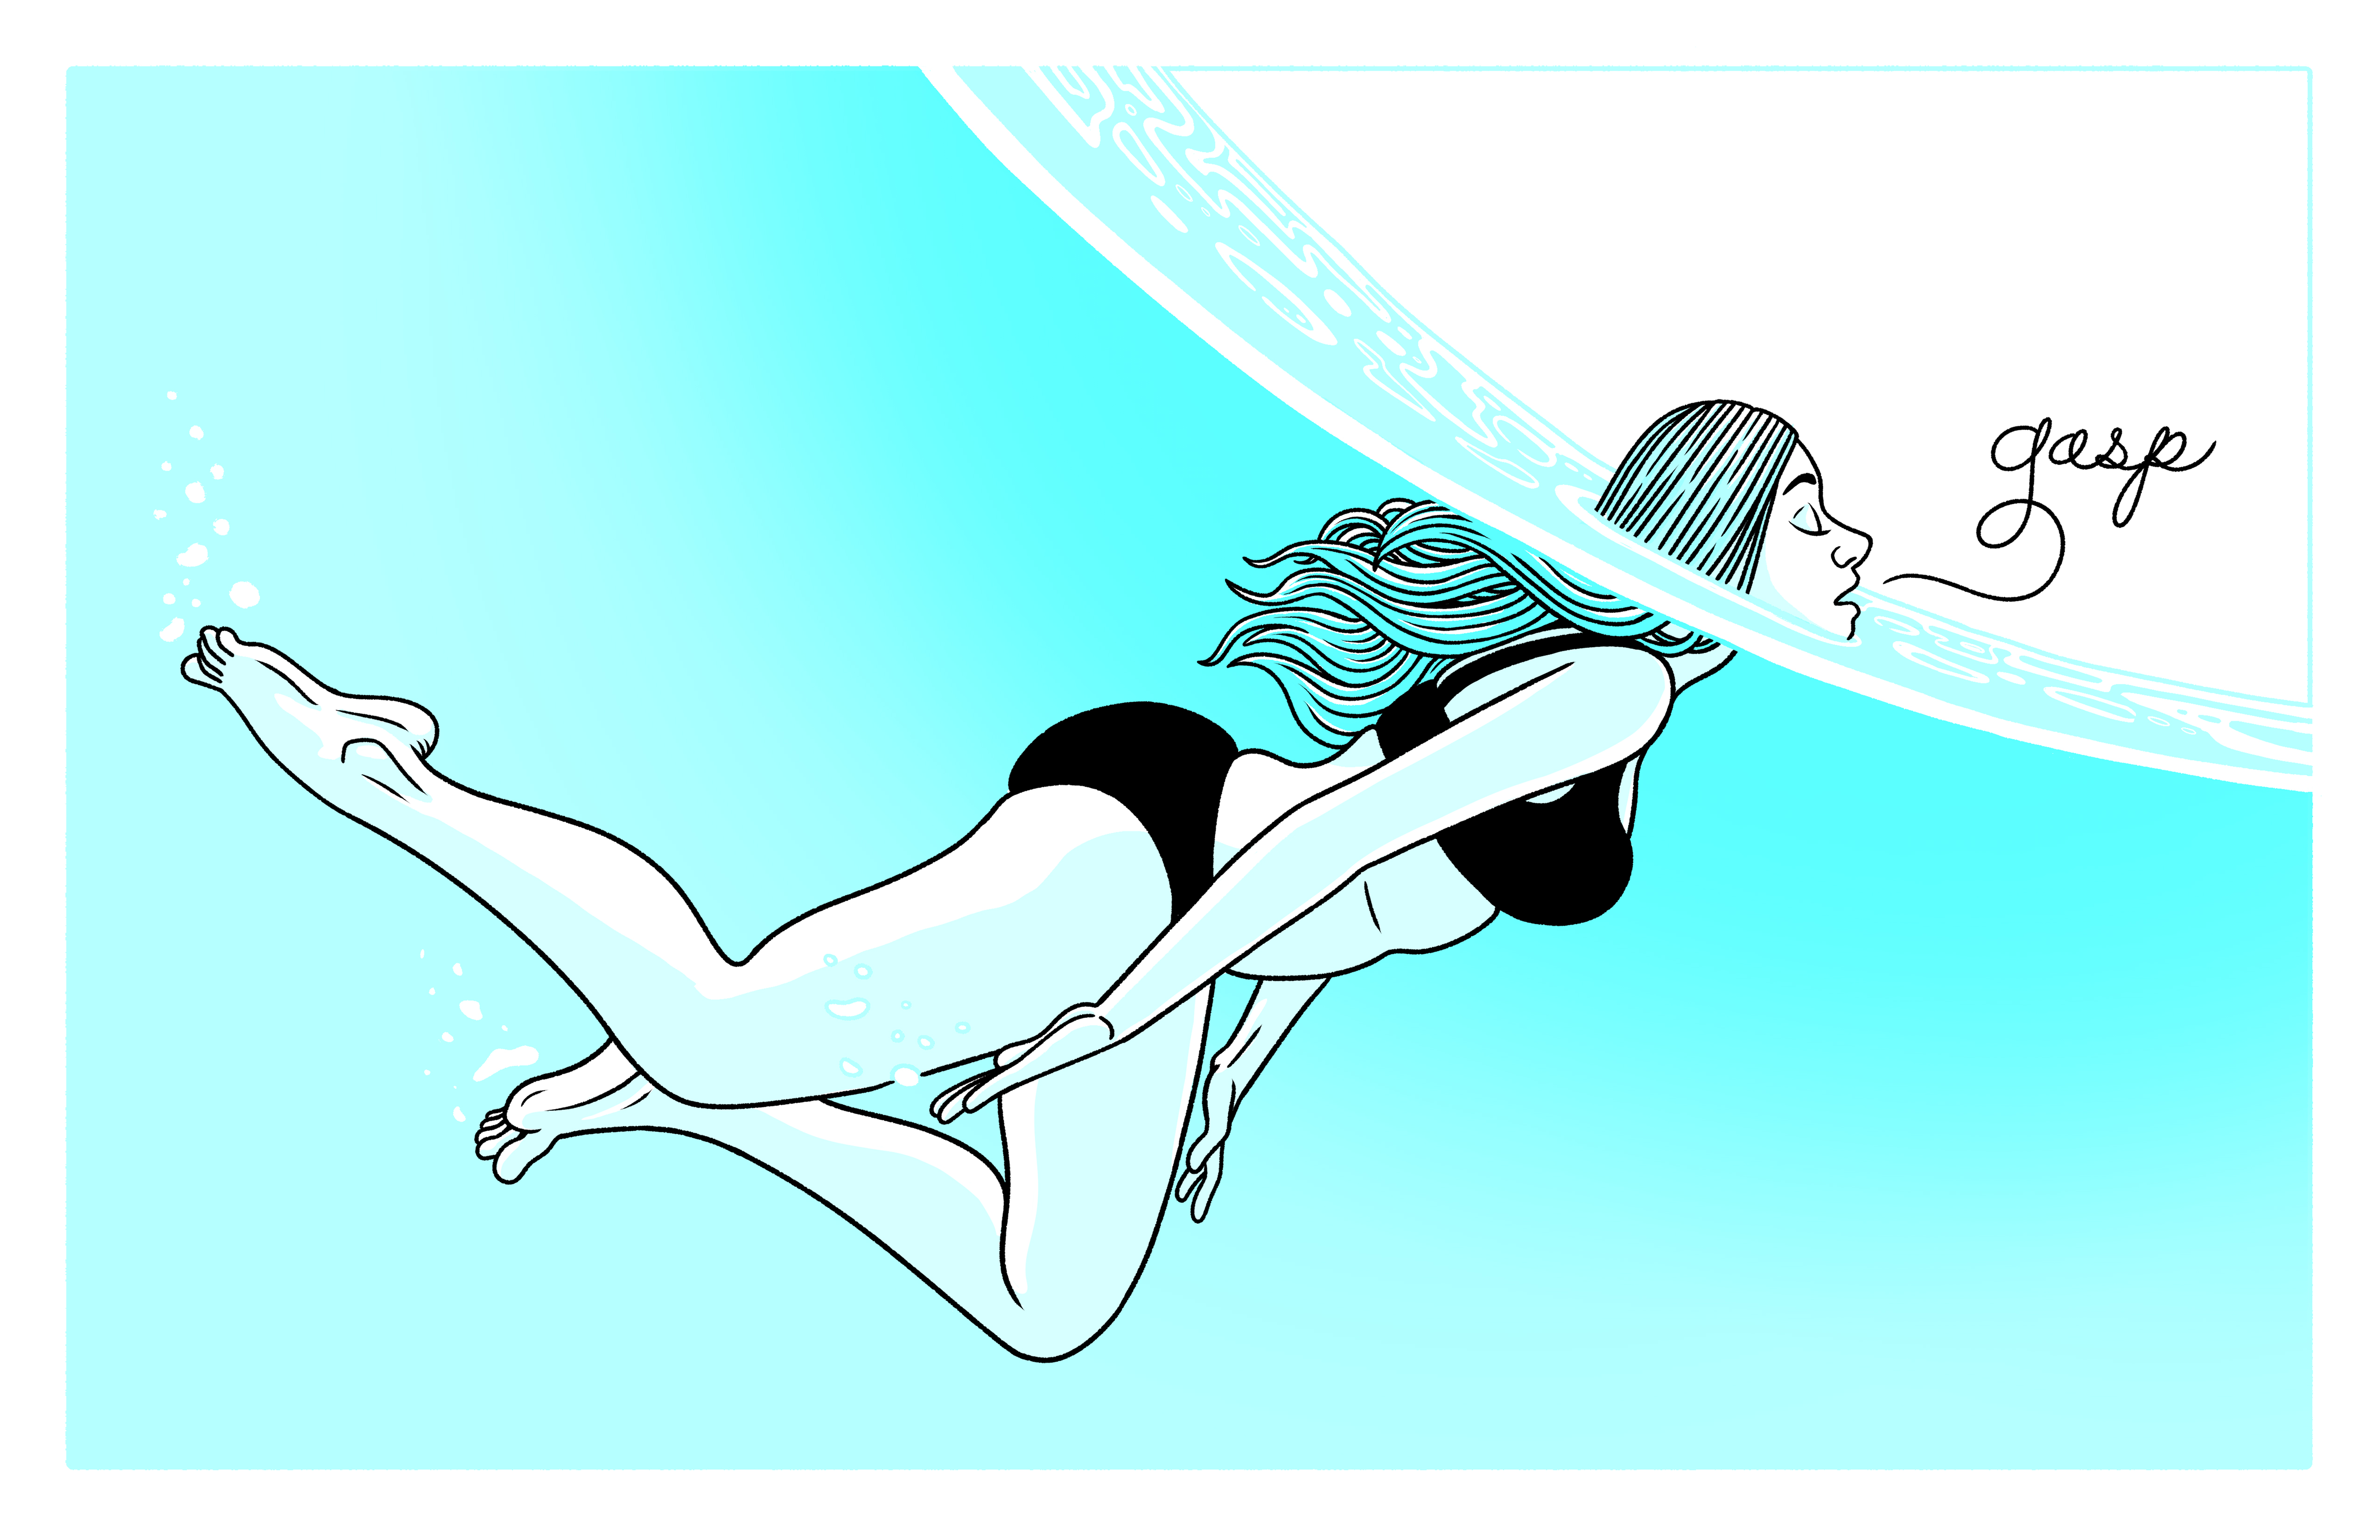 a cartoon of a woman coming up for air from swimming in the sea. her body is underwater but her head is above the water. text reads "Gasp" in flowing script. 